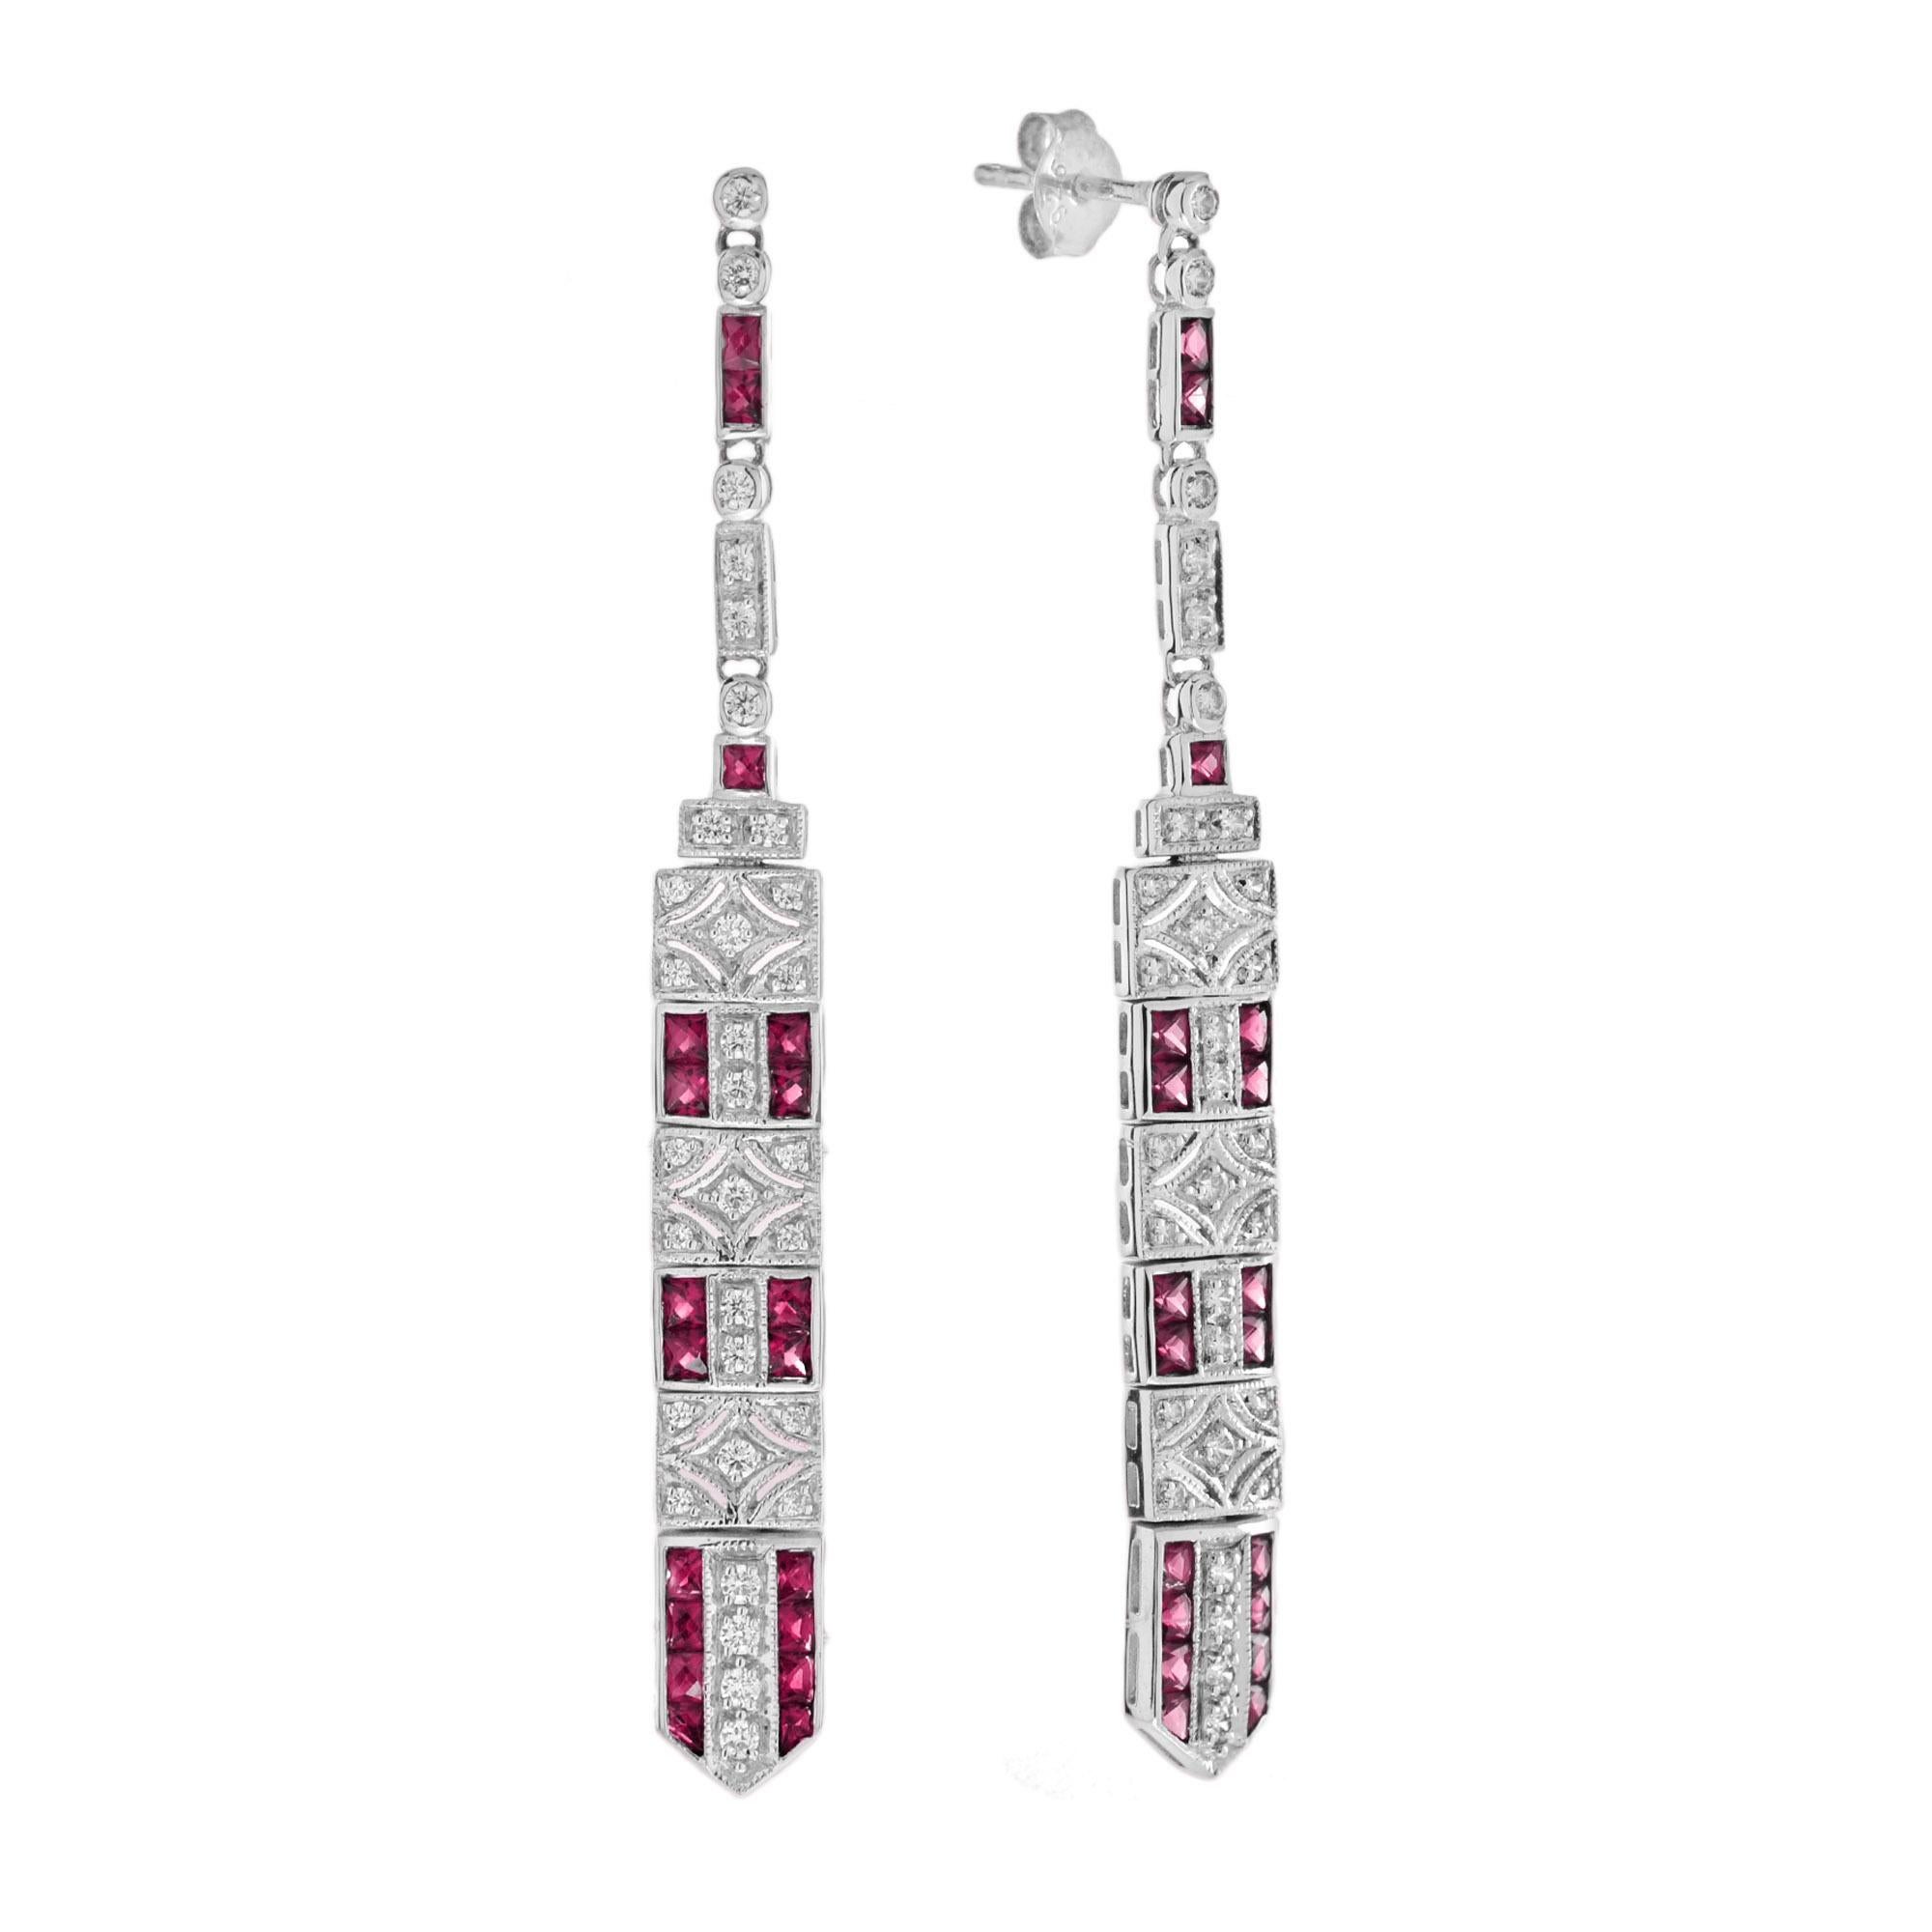 These art deco jewelry set of bar dangle earrings and bracelet are the epitome of vintage-inspired elegance featuring mesmerizing geometric patterns feature with ruby and diamonds.

Earrings Information
Metal: 14K White Gold
Width: 6 mm.
Length: 62